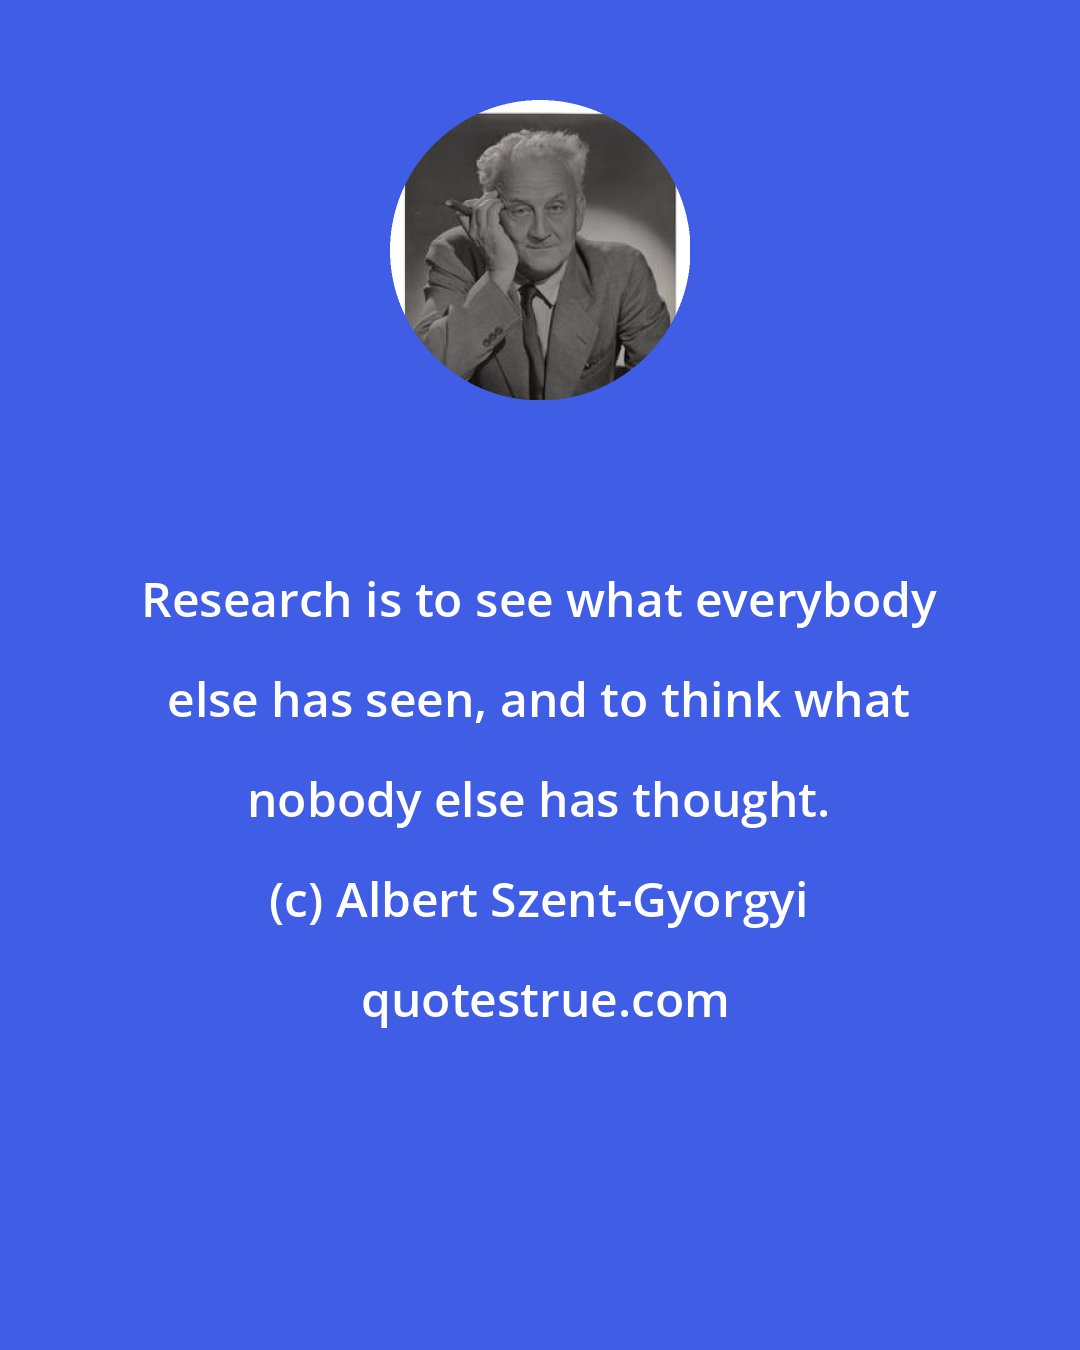 Albert Szent-Gyorgyi: Research is to see what everybody else has seen, and to think what nobody else has thought.